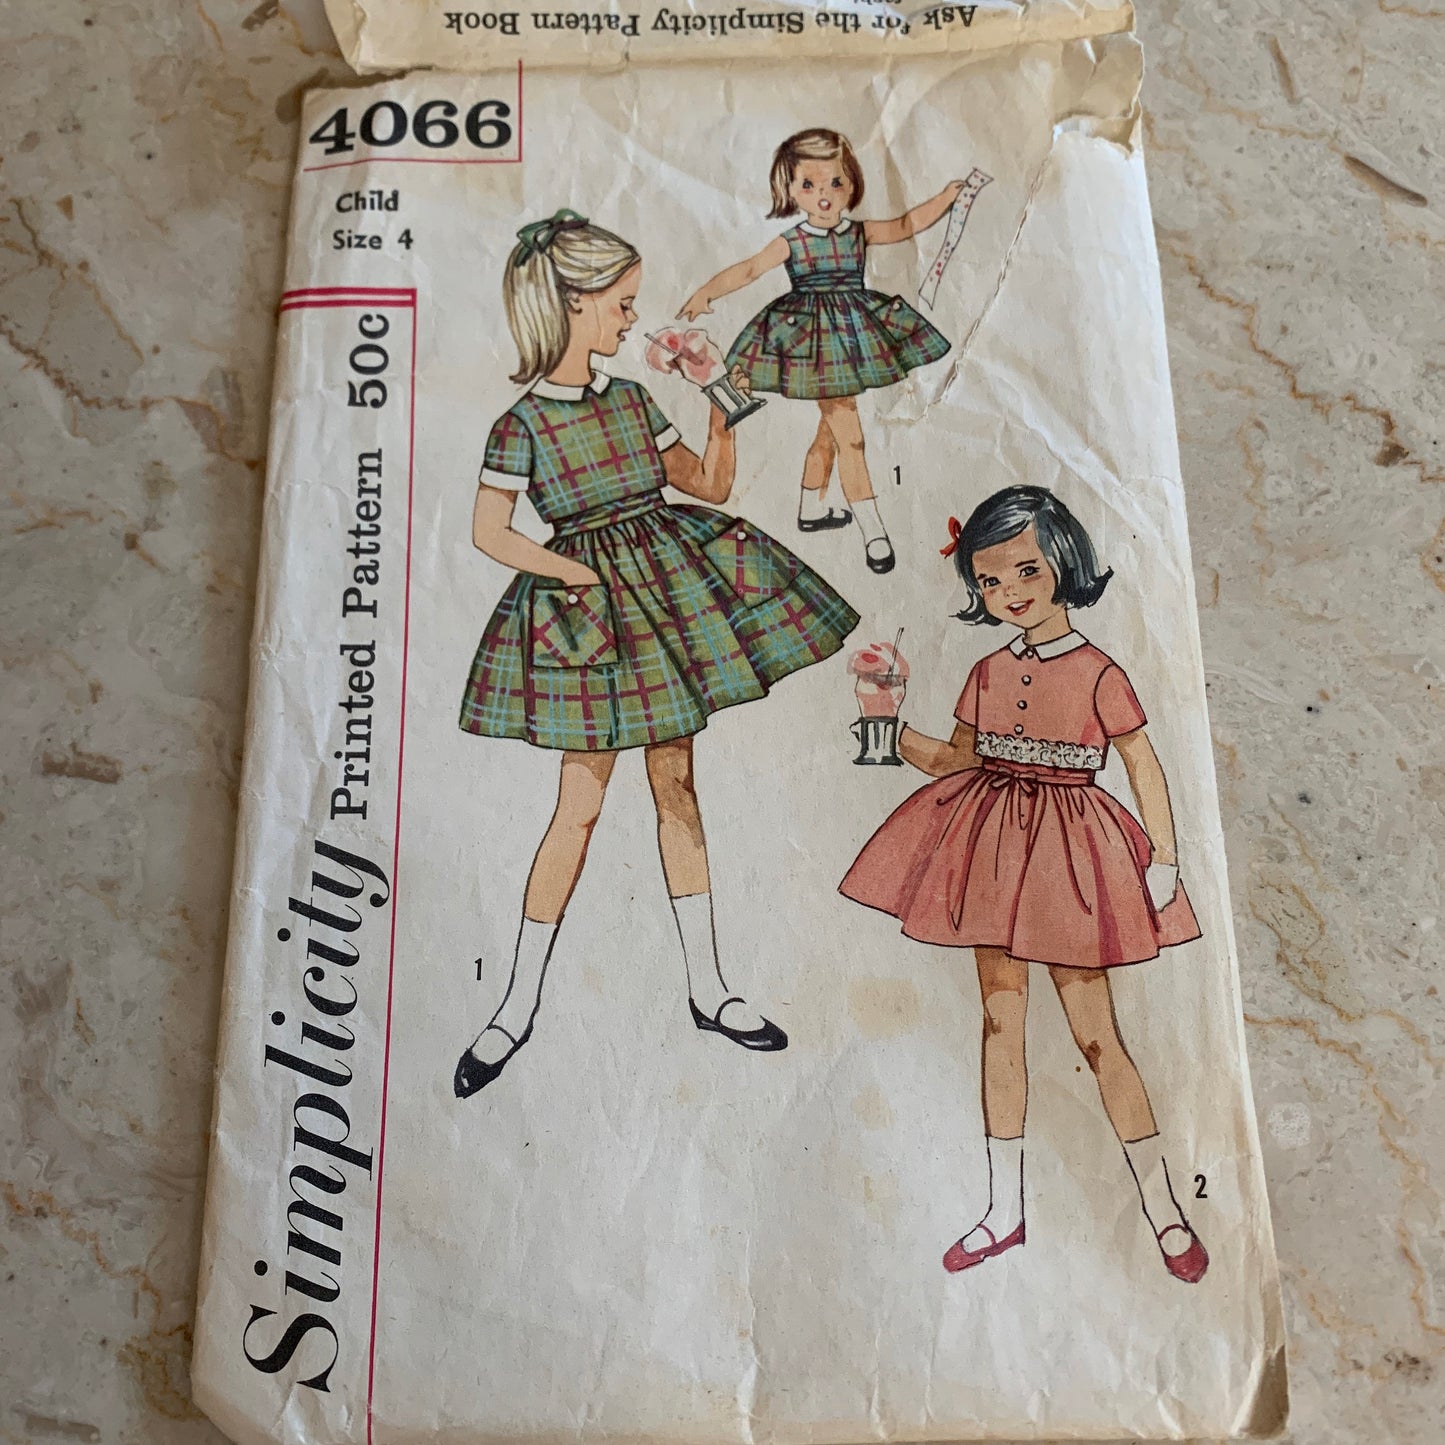 Child’s Size 4 Sleeveless Dress and Jacket Vintage Sewing Pattern Simplicity 4066